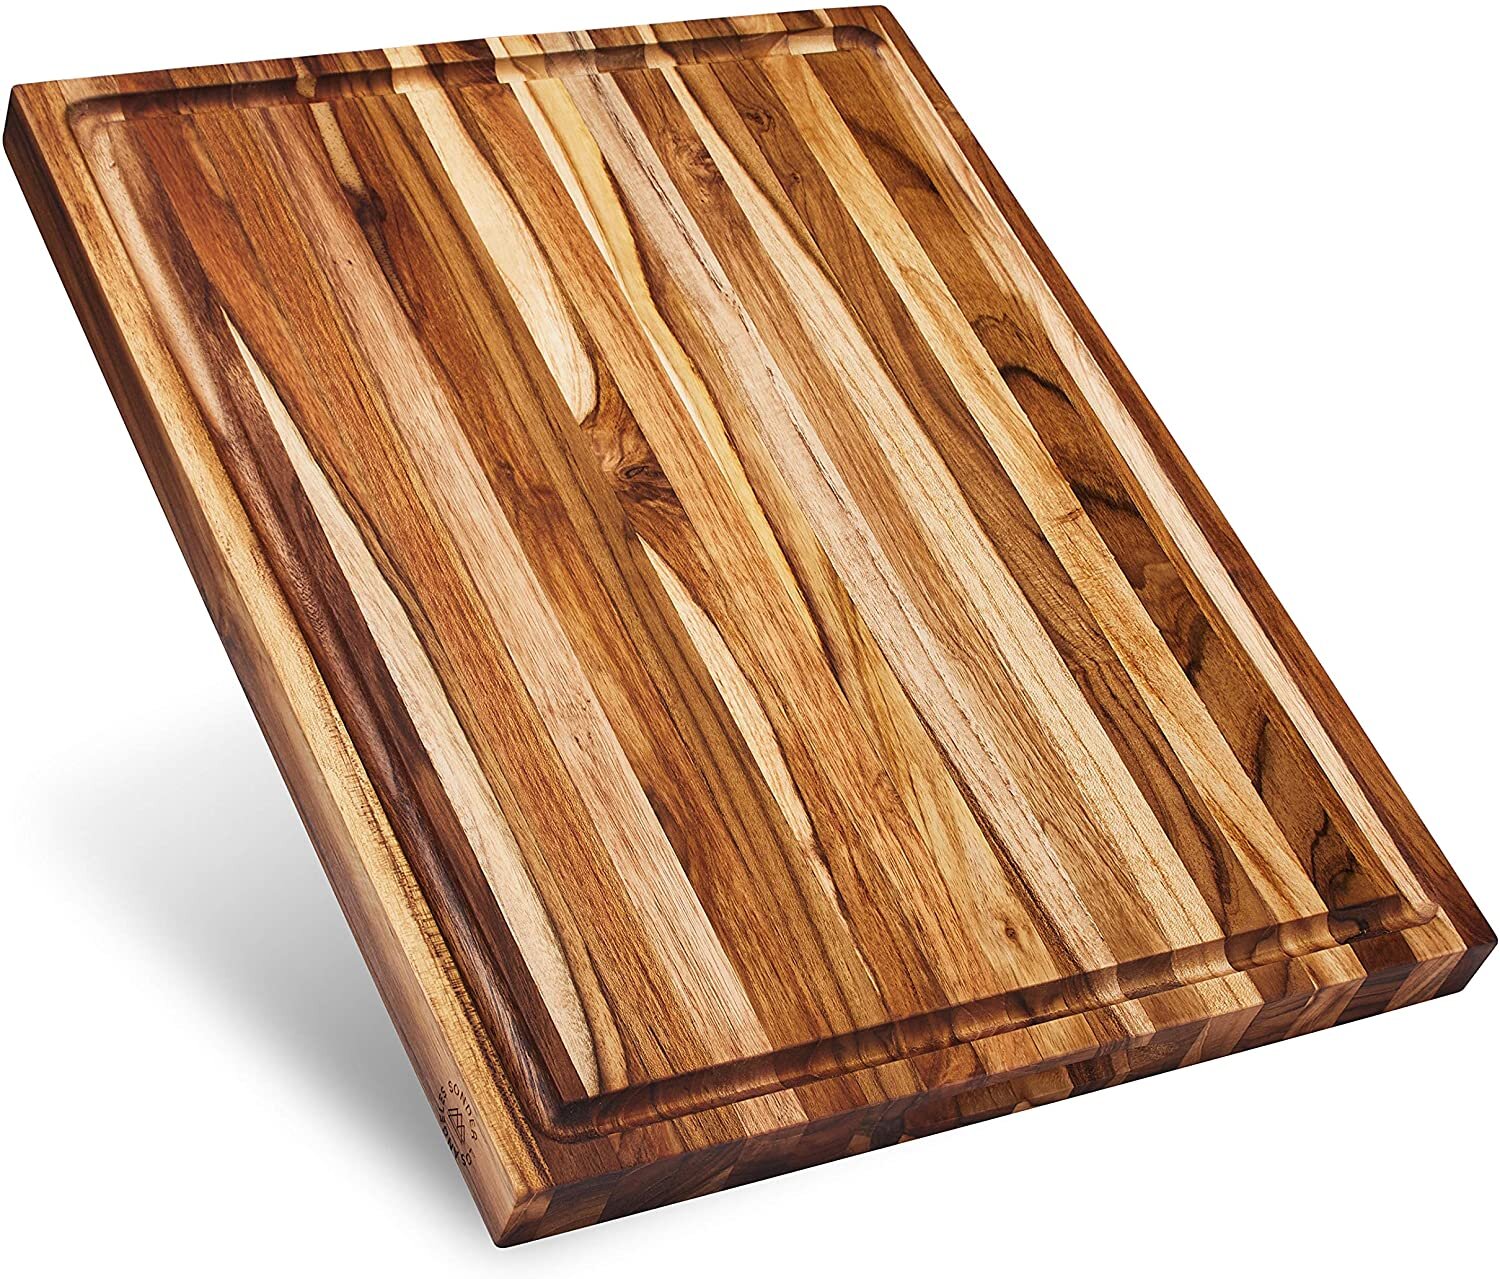 Sonder Los Angeles, Large Reversible Teak Wood Cutting Board, 18x14x1.25in with Juice Groove (Gift Box Included)